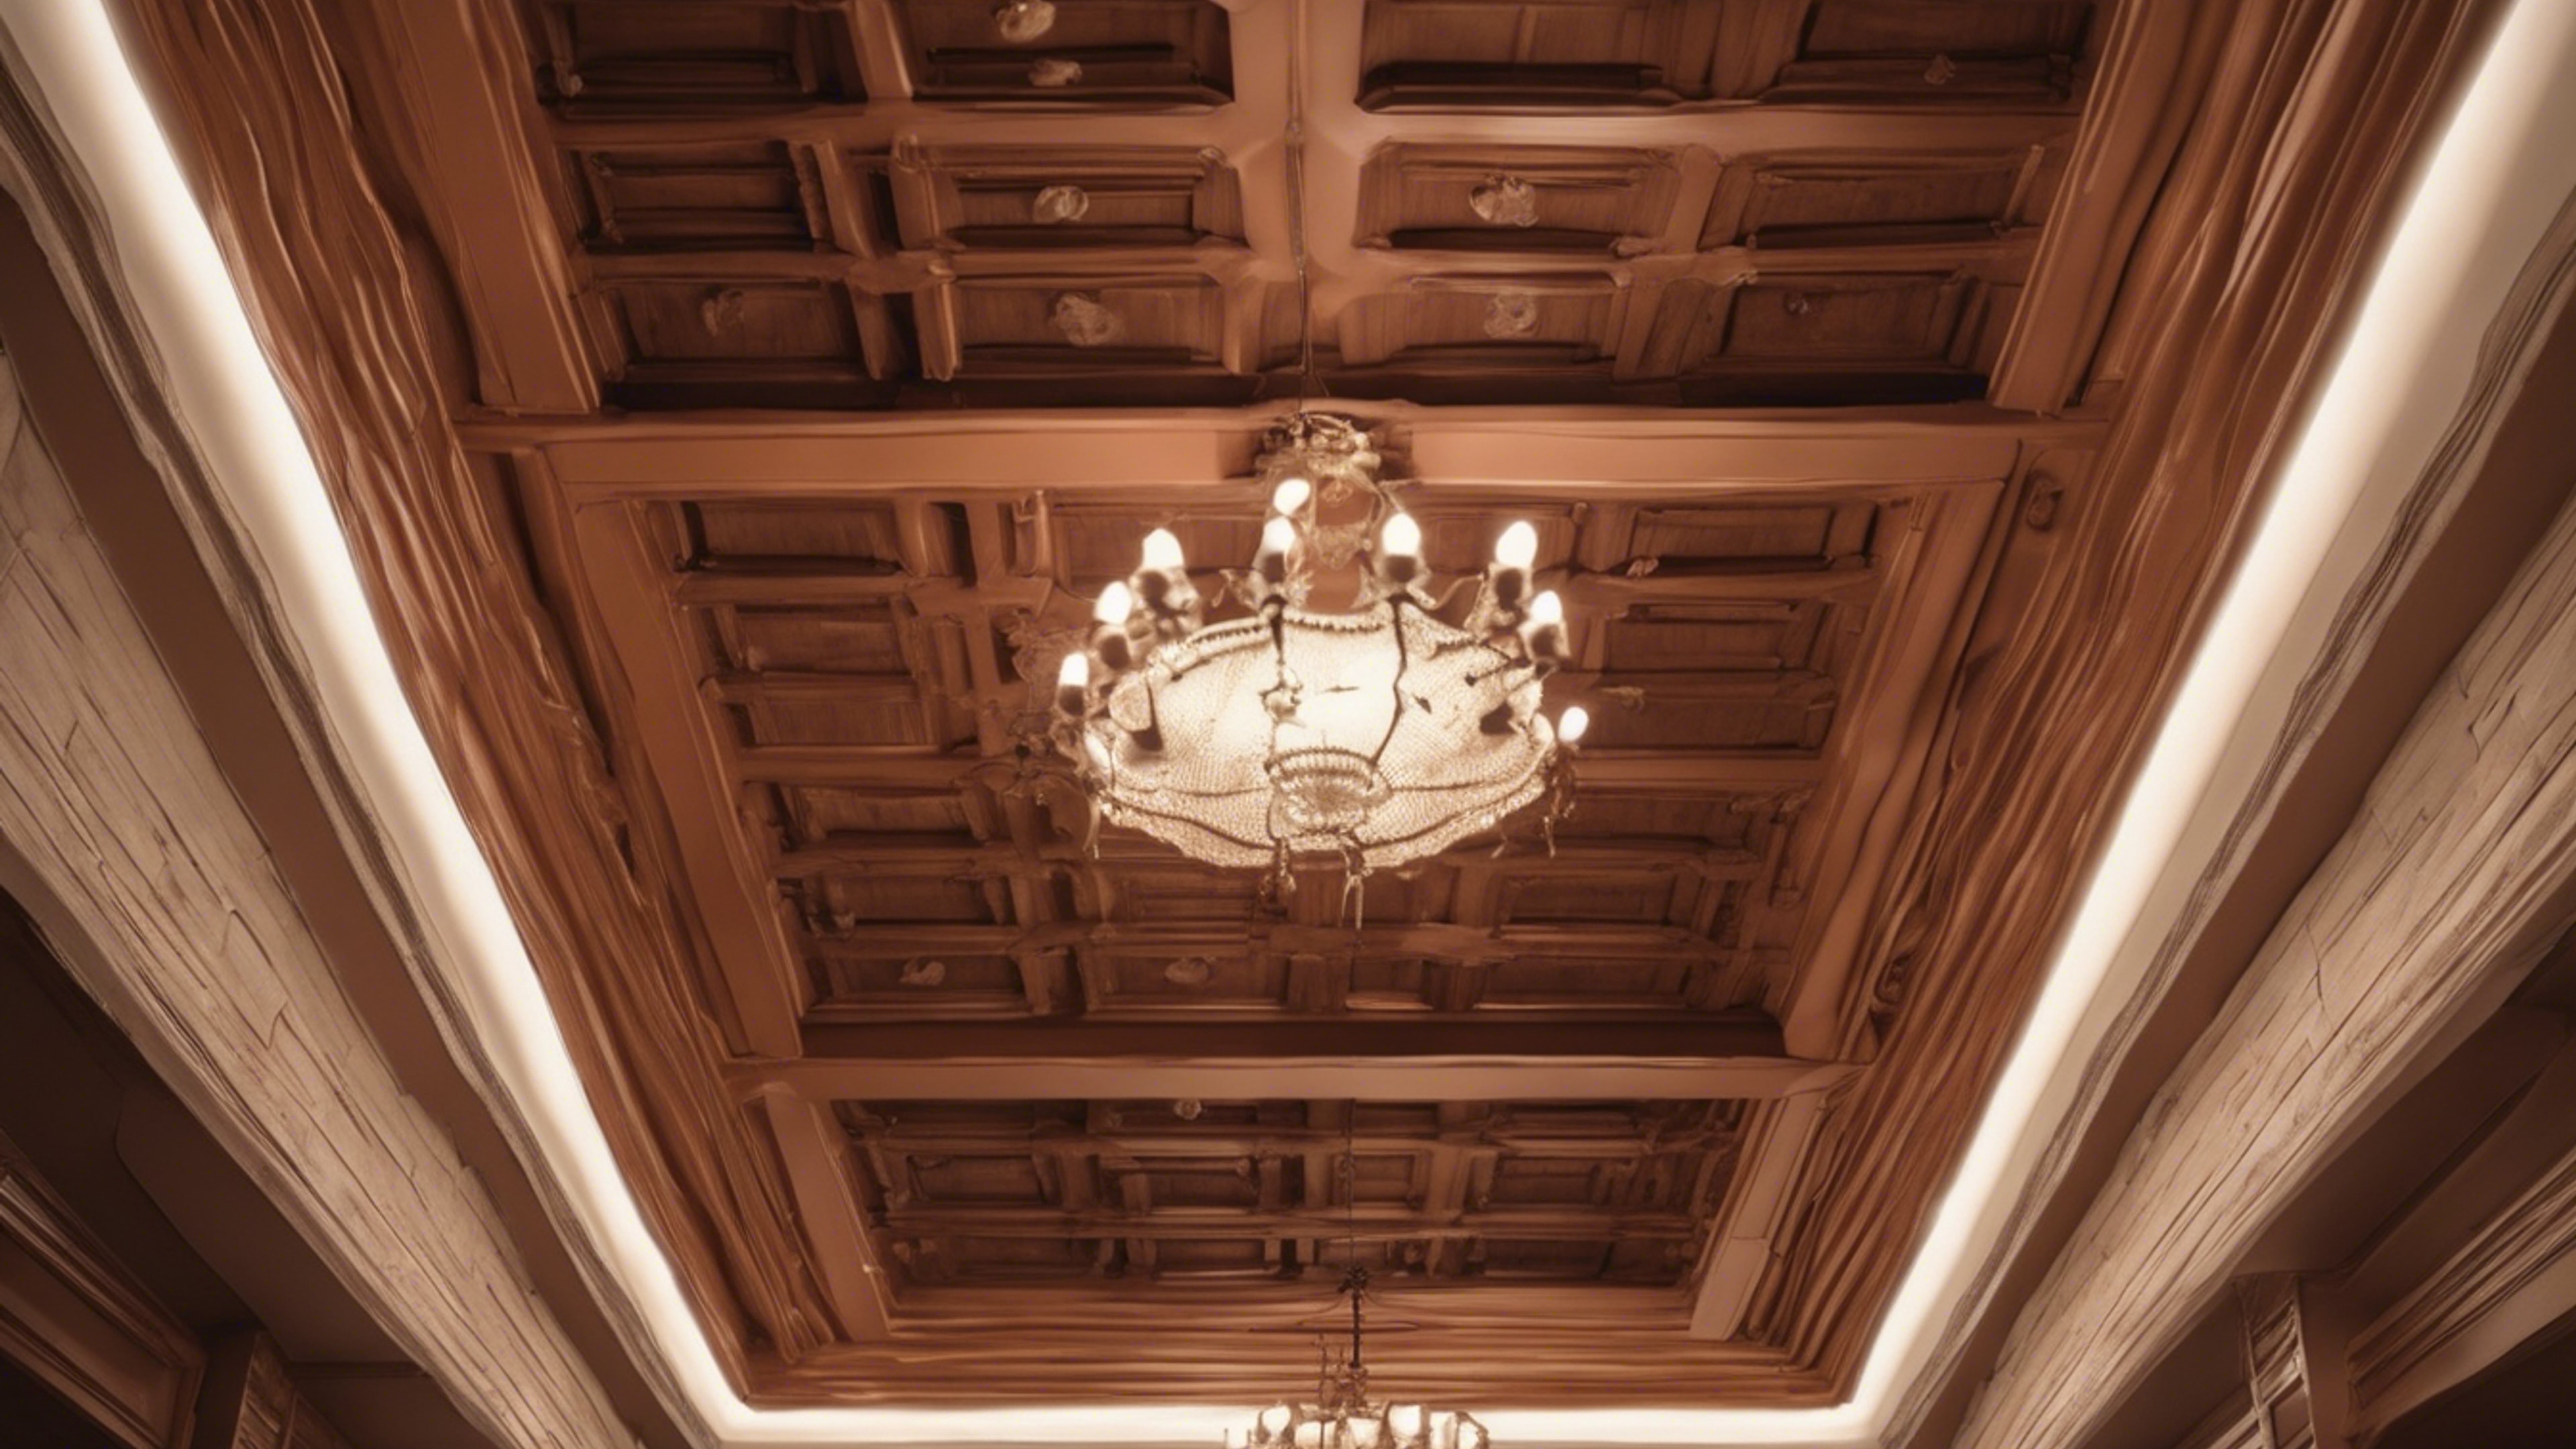 A warm brown coffered ceiling room decorated in traditional style Tapeta[0b856da927b2485ba9d5]